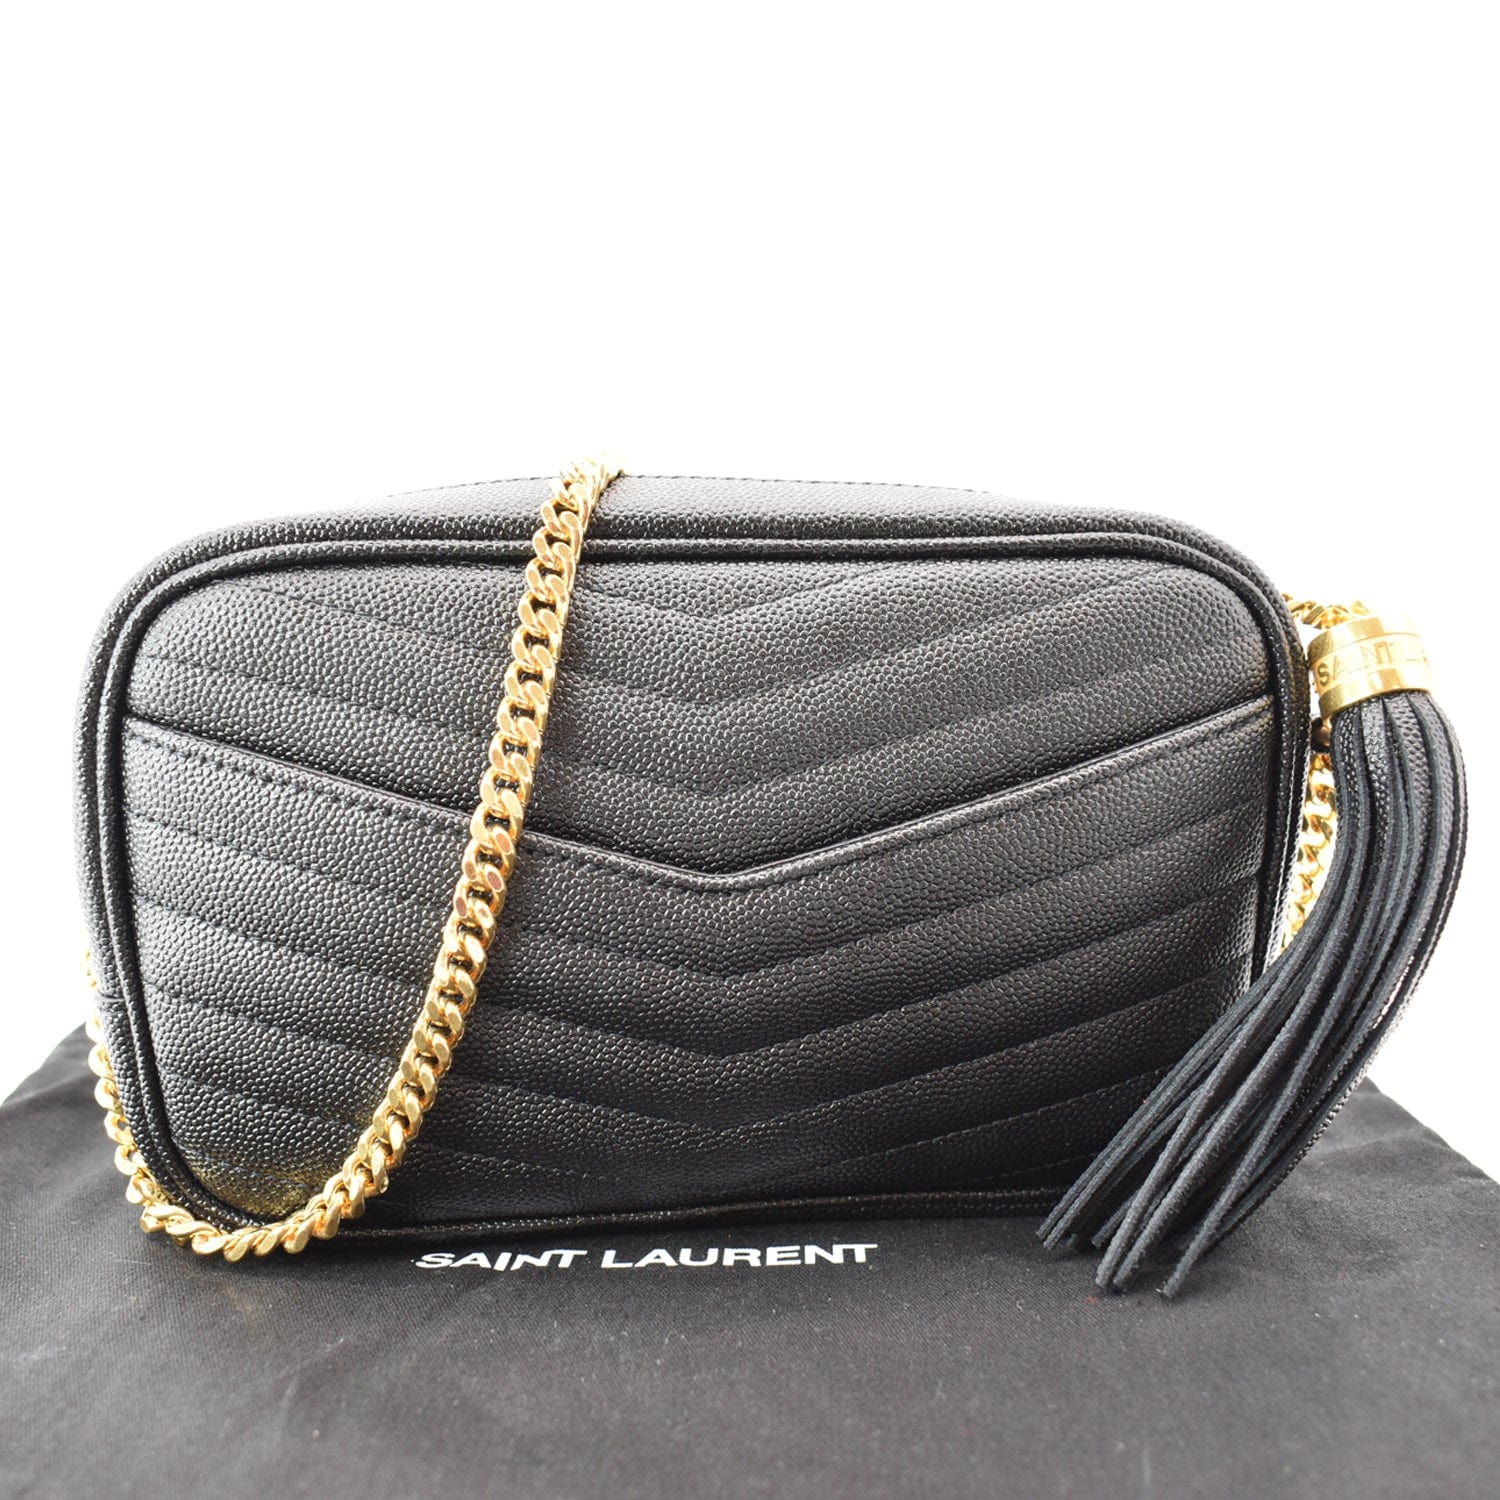 Saint Laurent 87 Quilted-leather Clutch Bag in Black